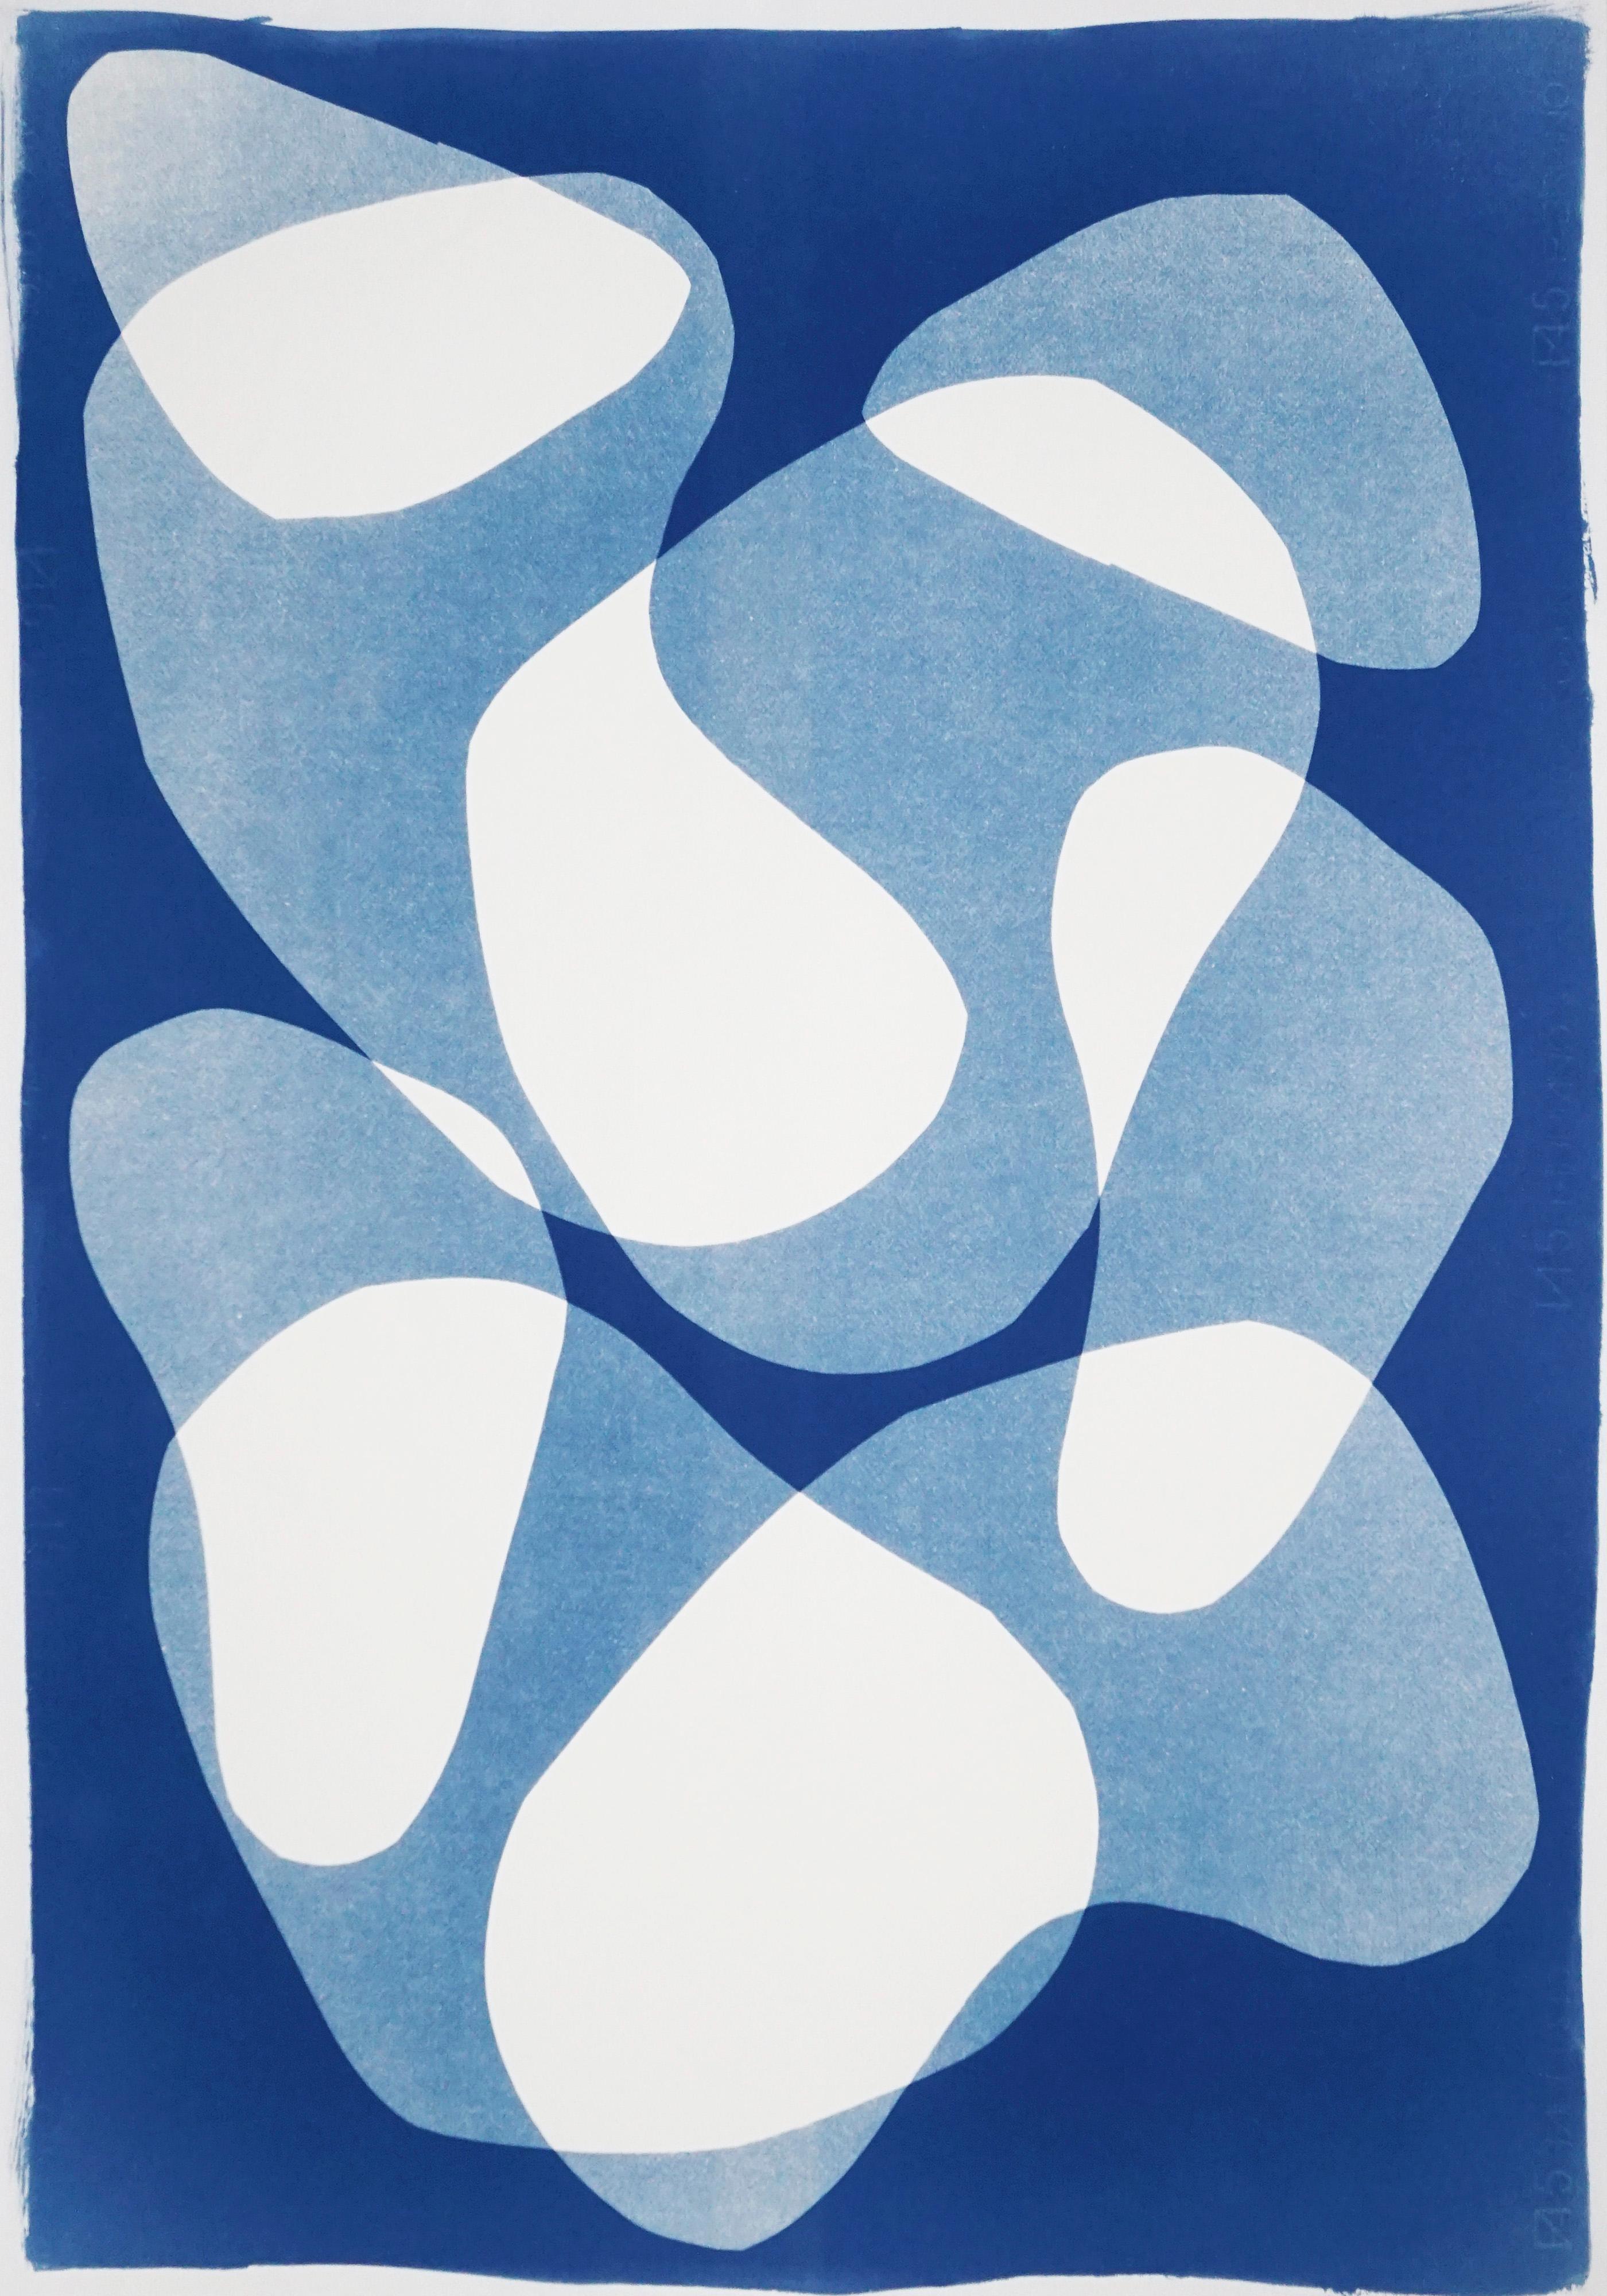 Blue Duo of Transparent Shapes, Cutout Layers Cyanotype Diptych on Paper, Modern 1